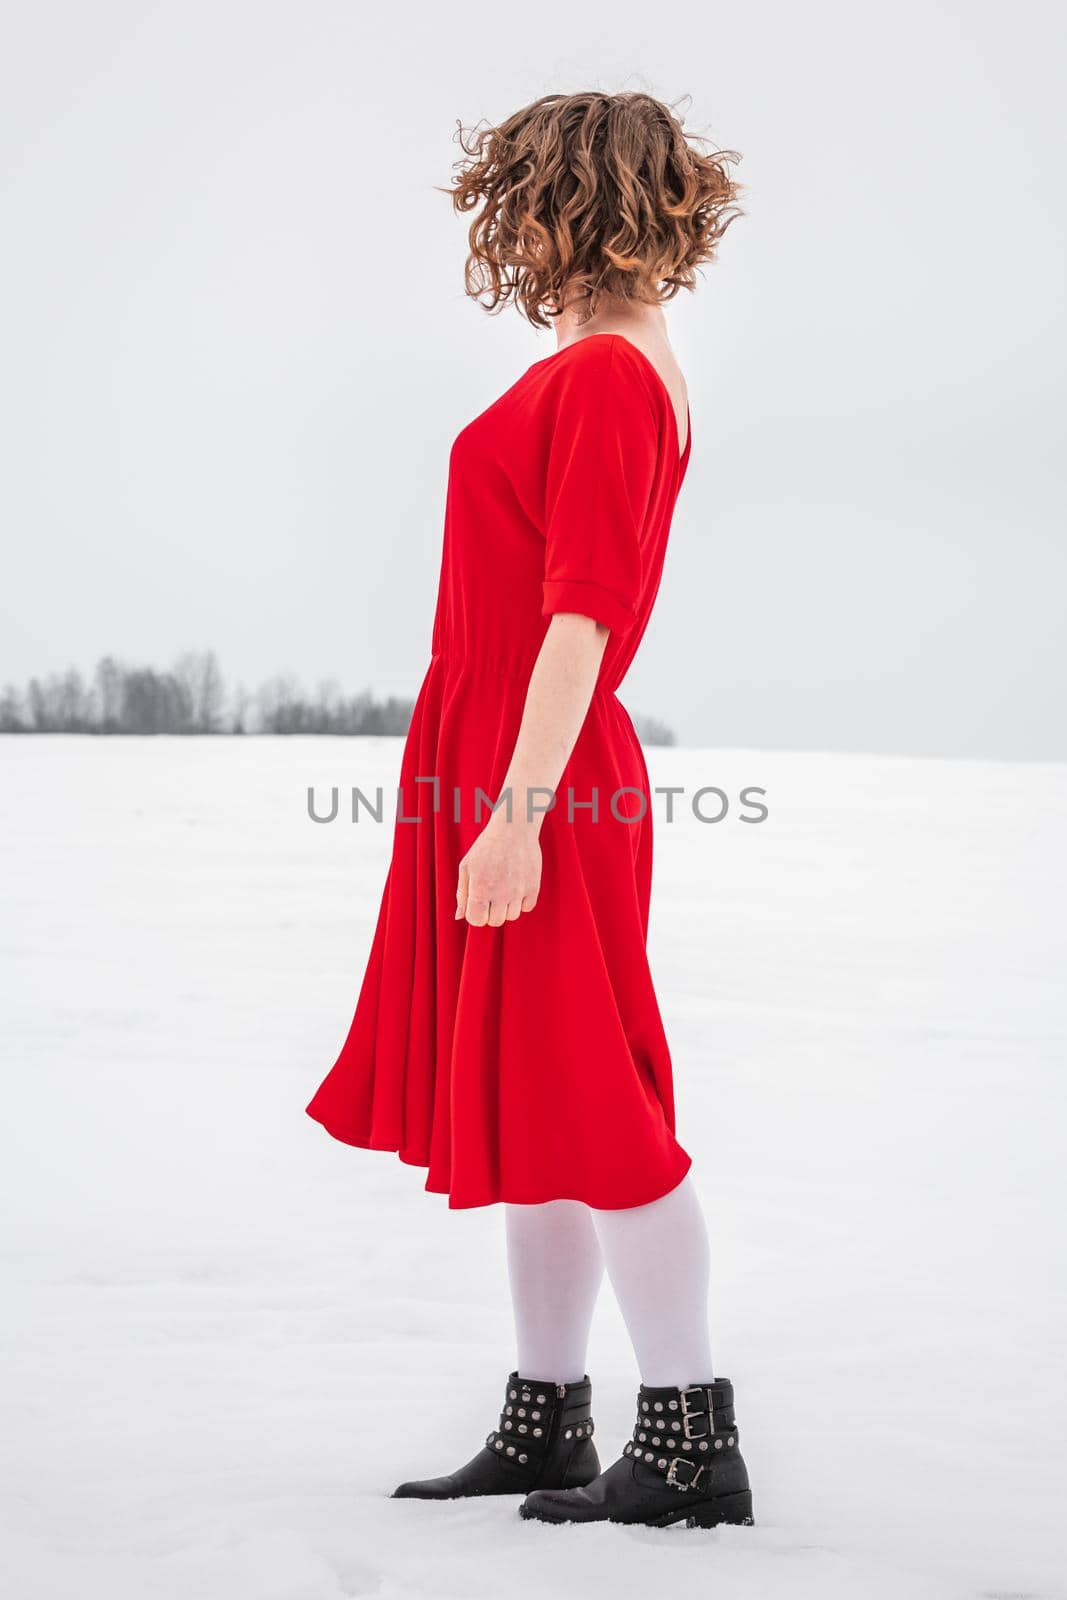 Beautiful woman in a red dress by RuslanKphoto